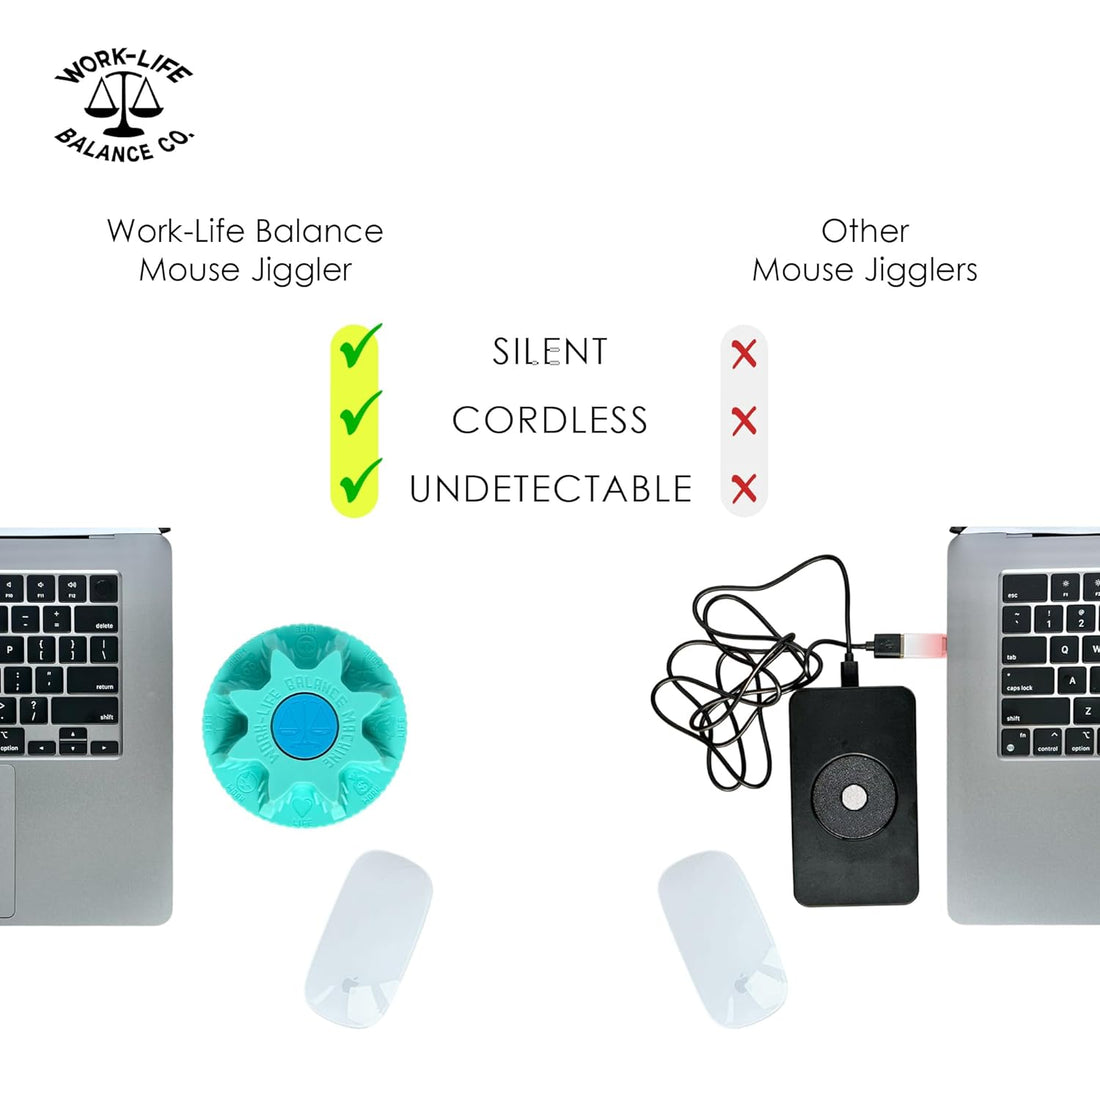 Work-Life Balance Corporation Mechanical Mouse Jiggler Undetectable Device No Usb No Software Required, Computer Awake - Cordless And Wireless Mouse Mover Works For 12-24 Months On Aa Battery (Aqua)